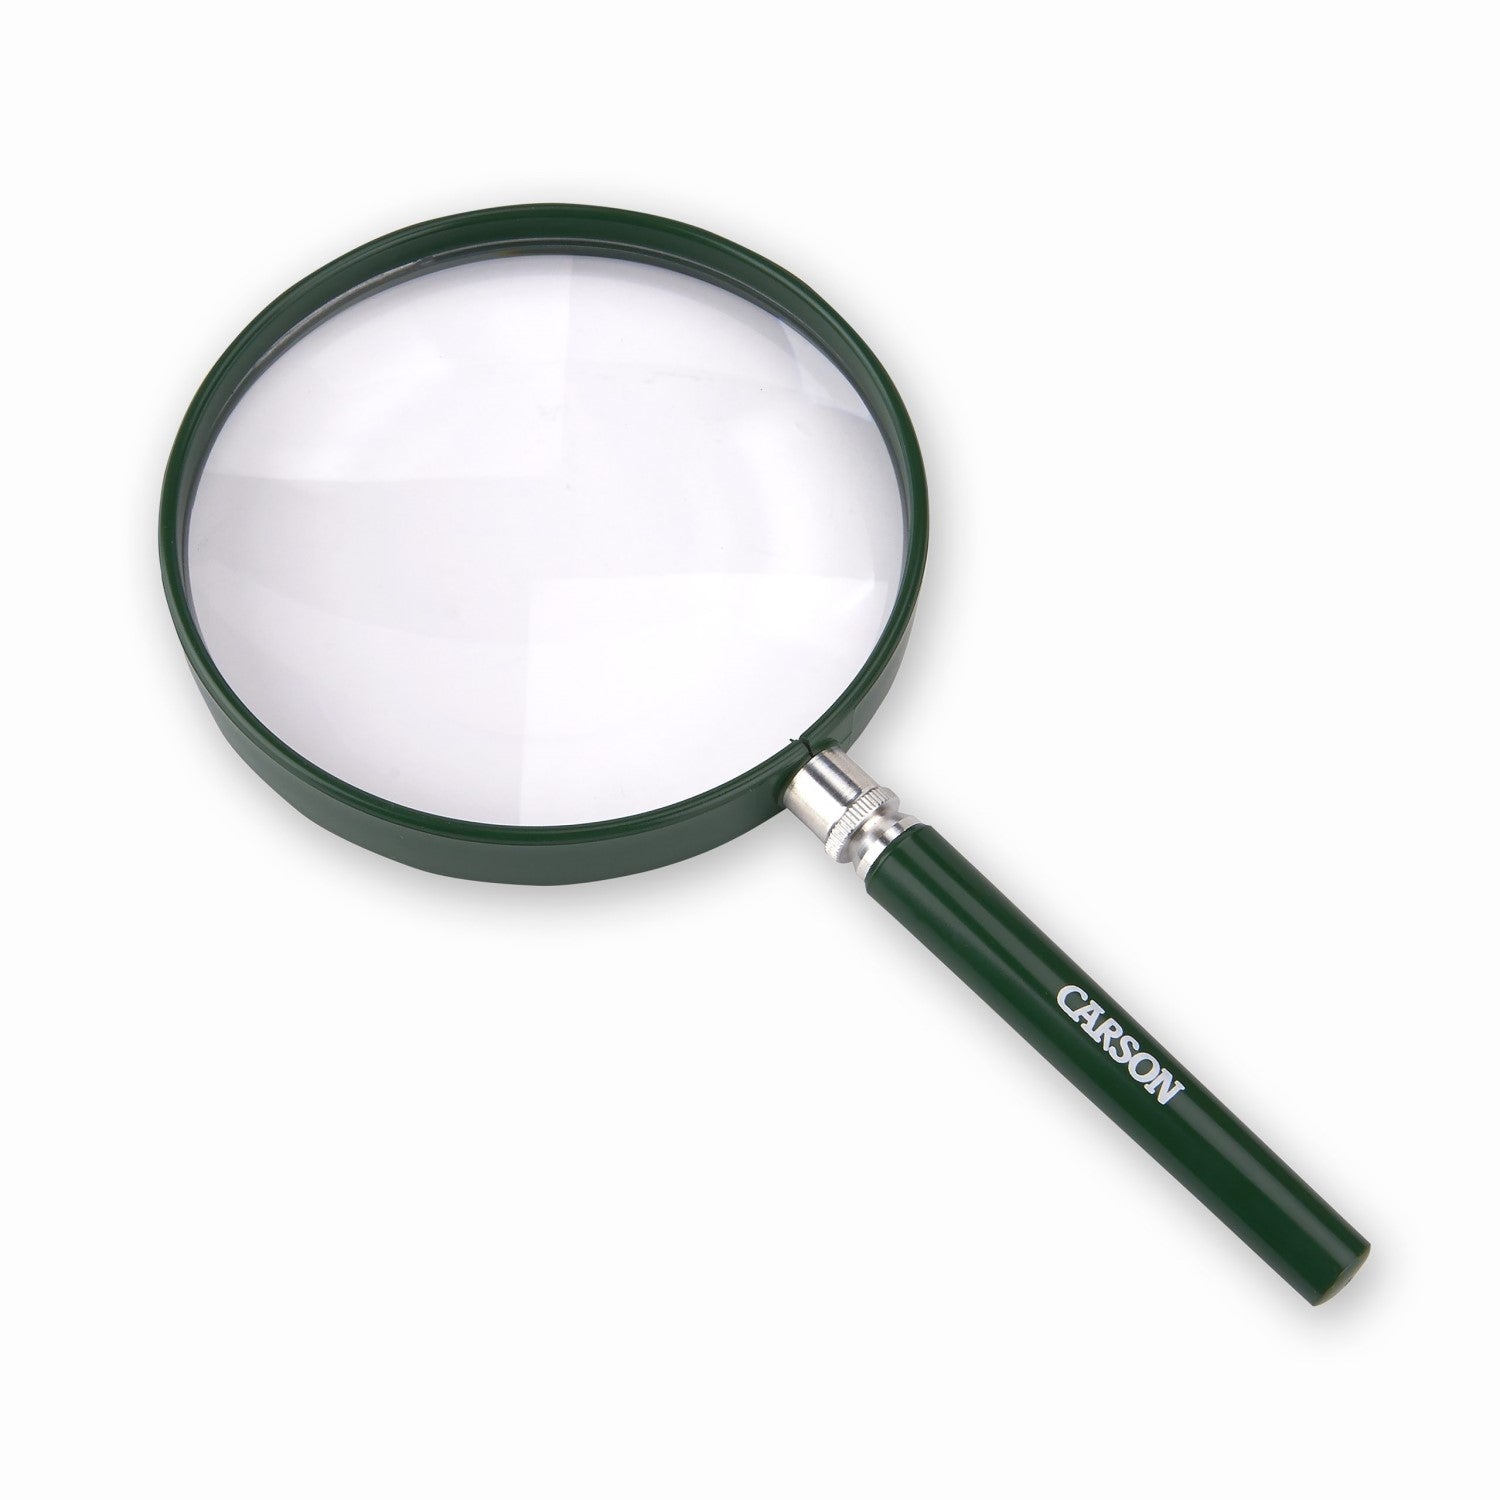 Fish'n Grip Pro™ 4.5x LED Lit Magnifier with Tweezers and Line Cutter –  Carson Optical